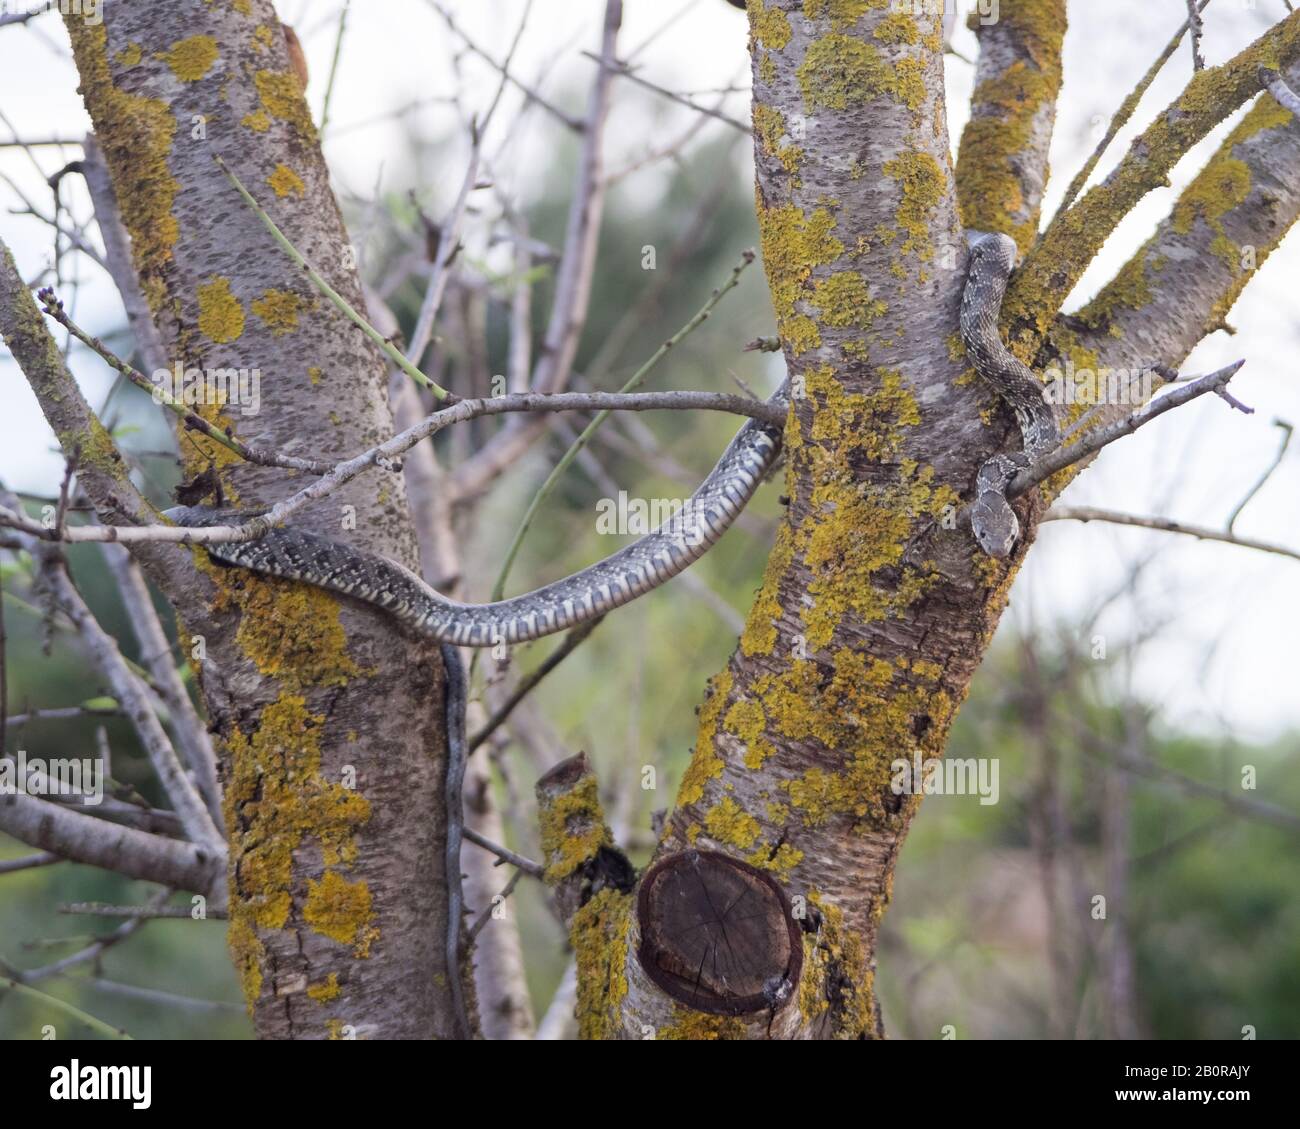 A close-up of a horseshoe whip snake on the branches of an almond tree Stock Photo